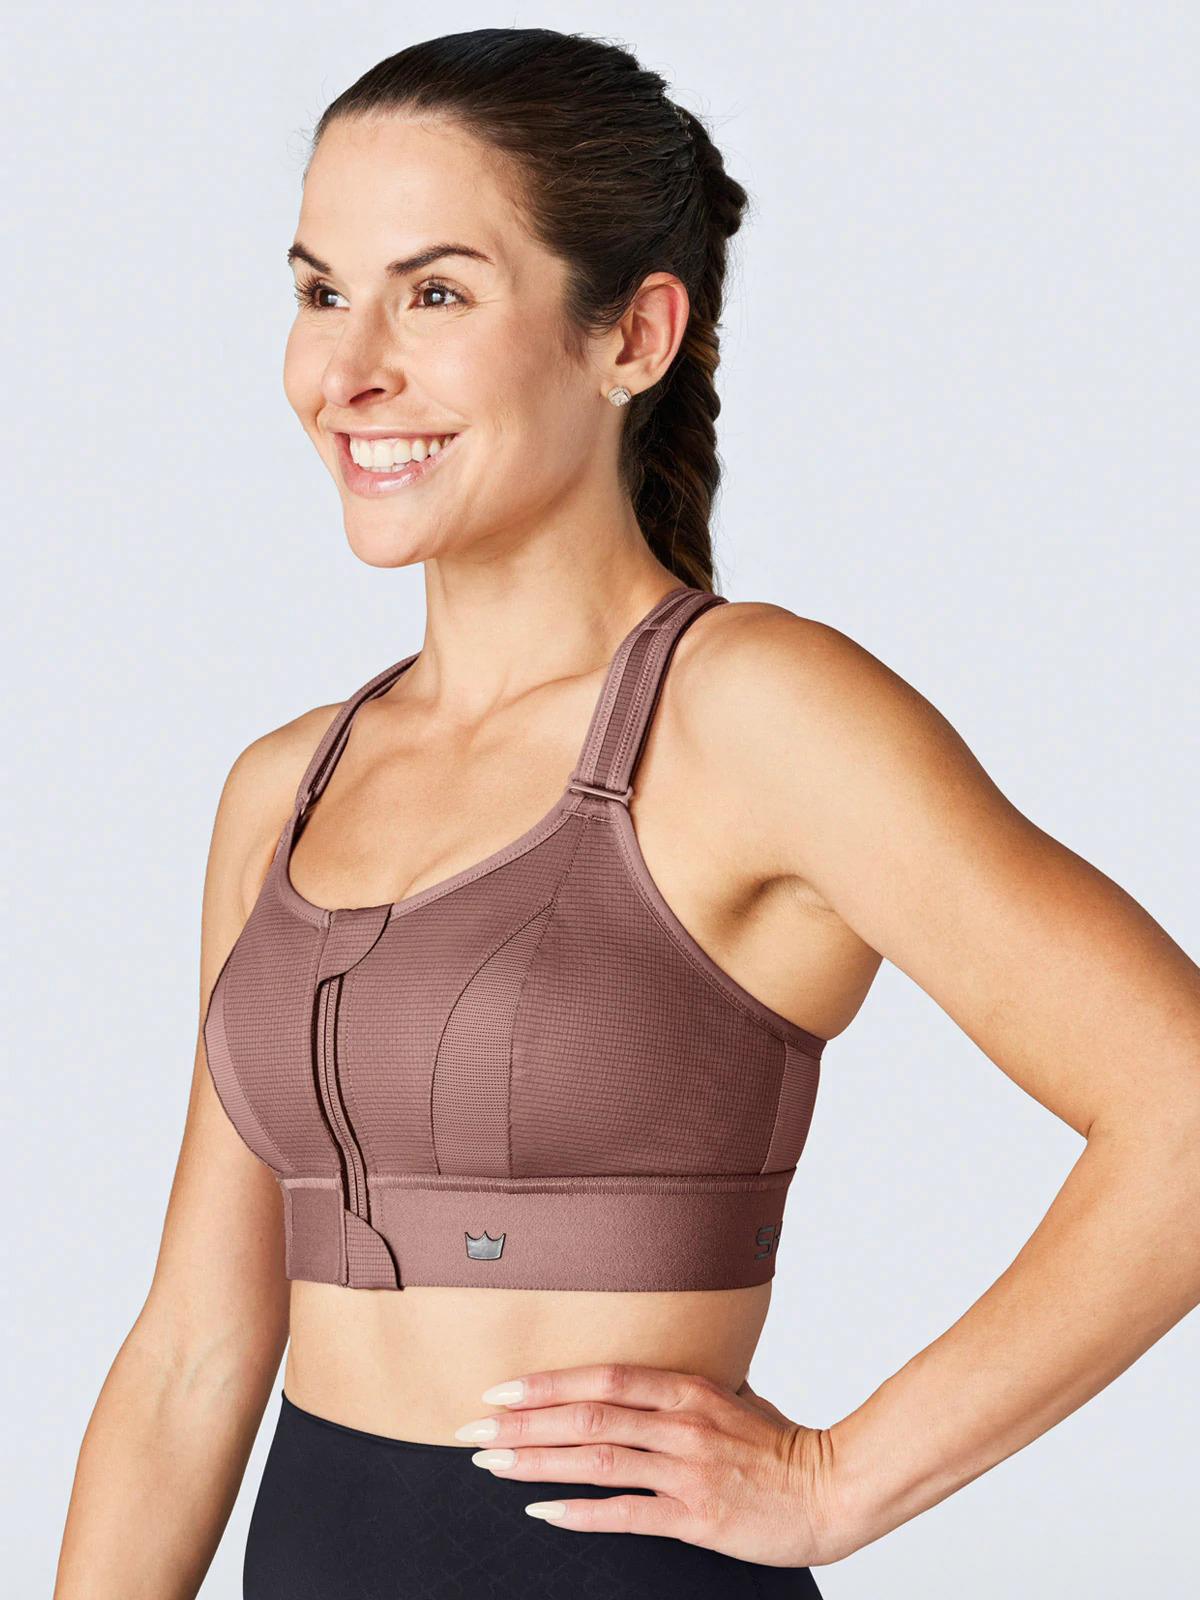 Tryright Classic High Impact Workout Bras for Women